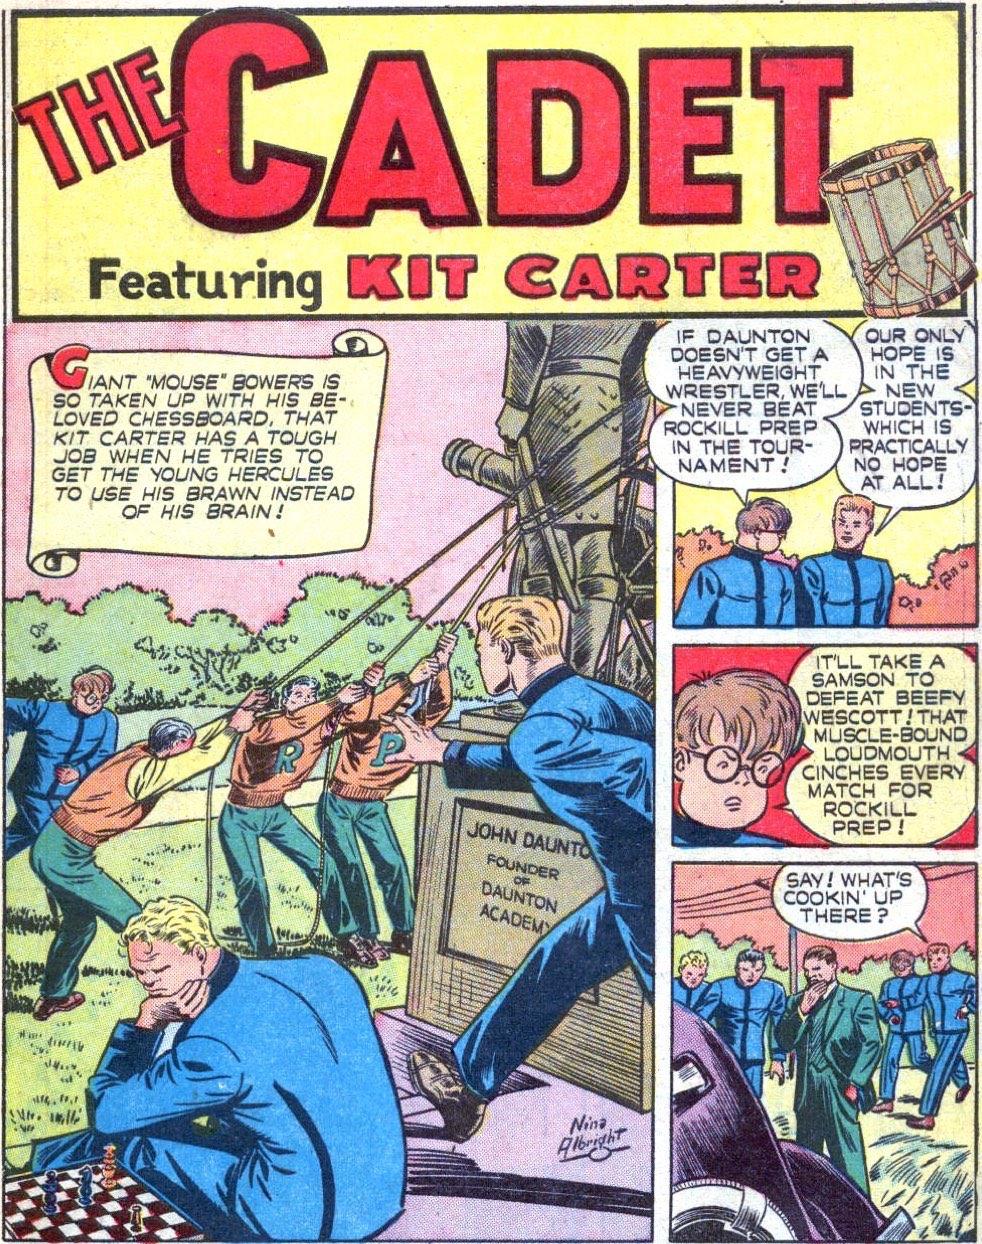 The Cadet, written by Nina Albright, is Target comic, Vol. 7, No. 11, Jan.